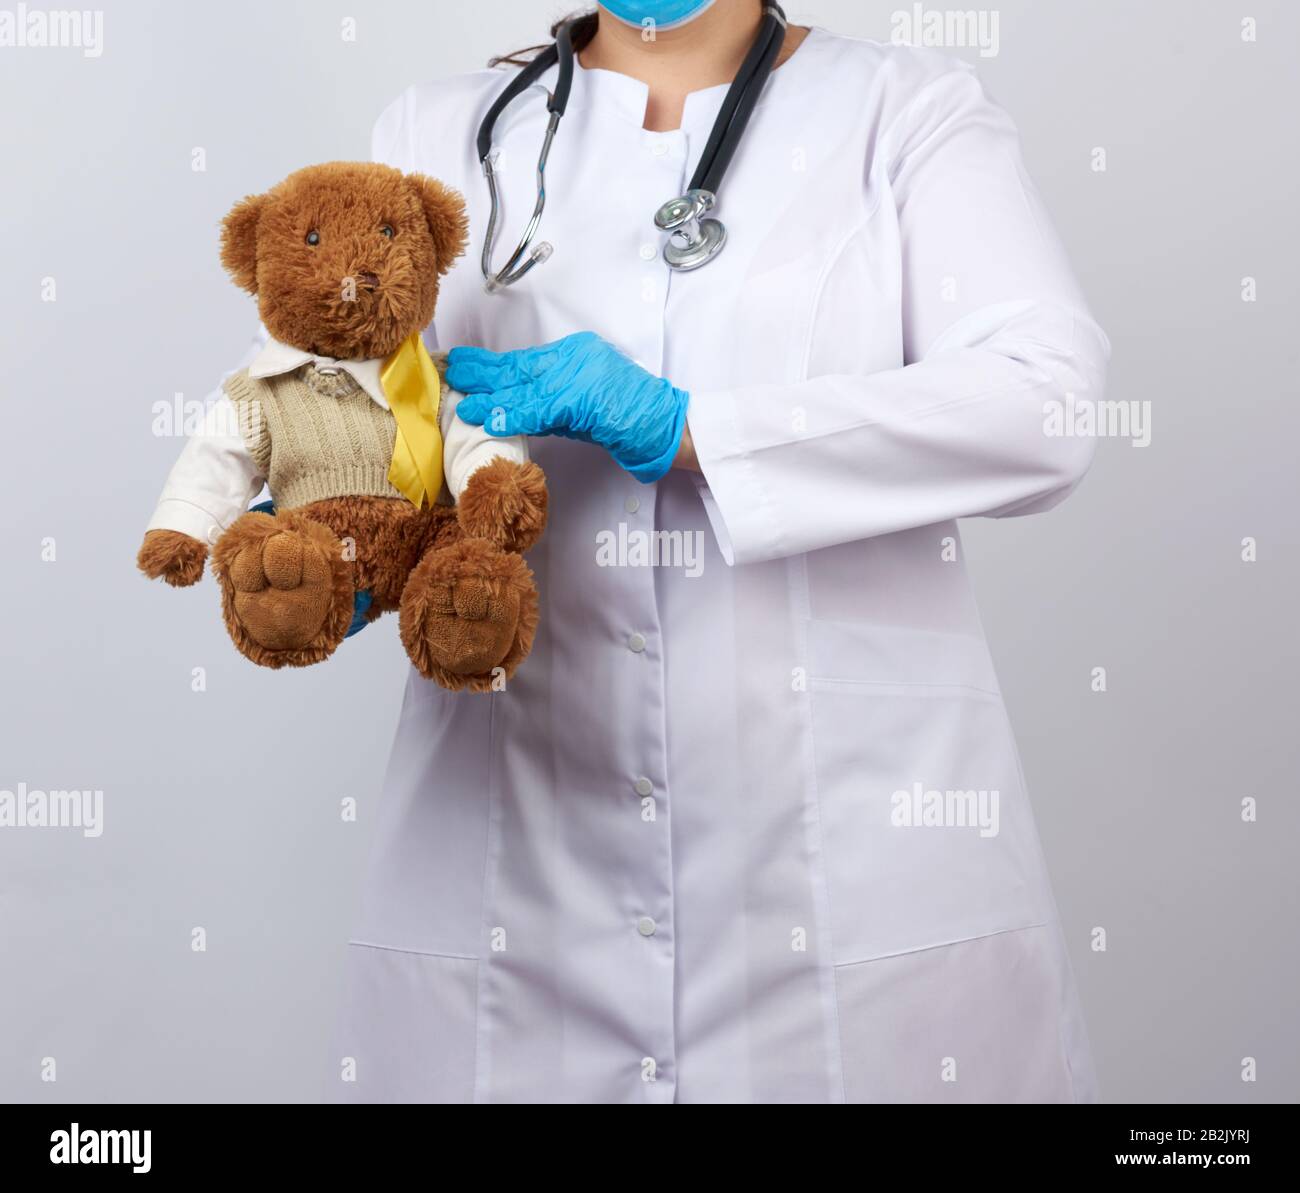 pediatrician in white coat, blue latex gloves holds a brown teddy bear with a yellow ribbon on a sweater, concept of the fight against childhood cance Stock Photo